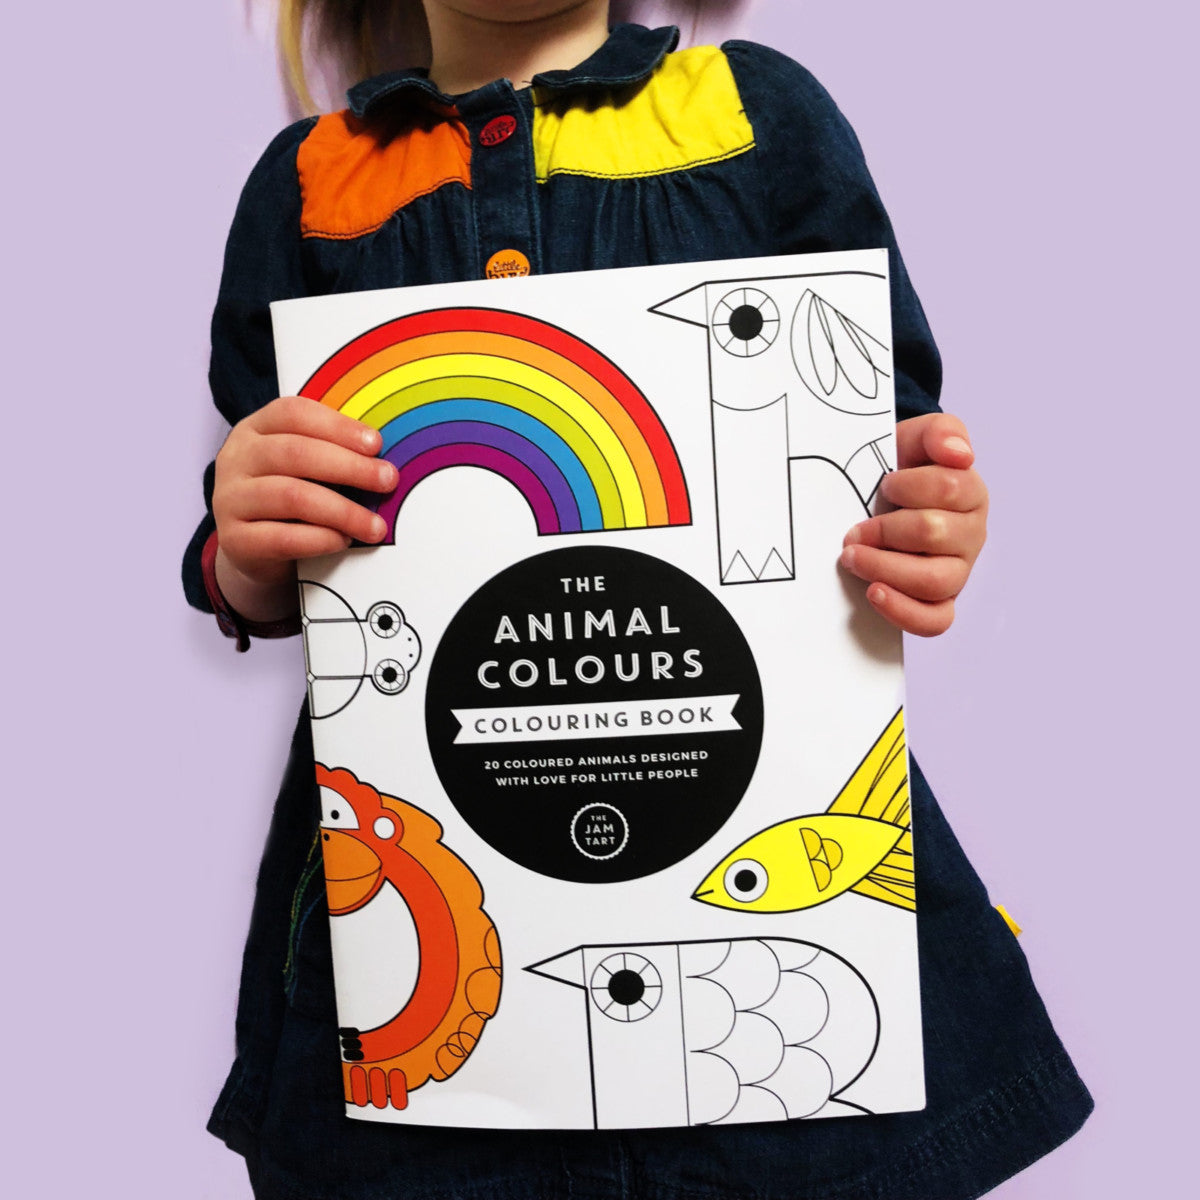 The Animal Colours Colouring Book by The Jam Tart 